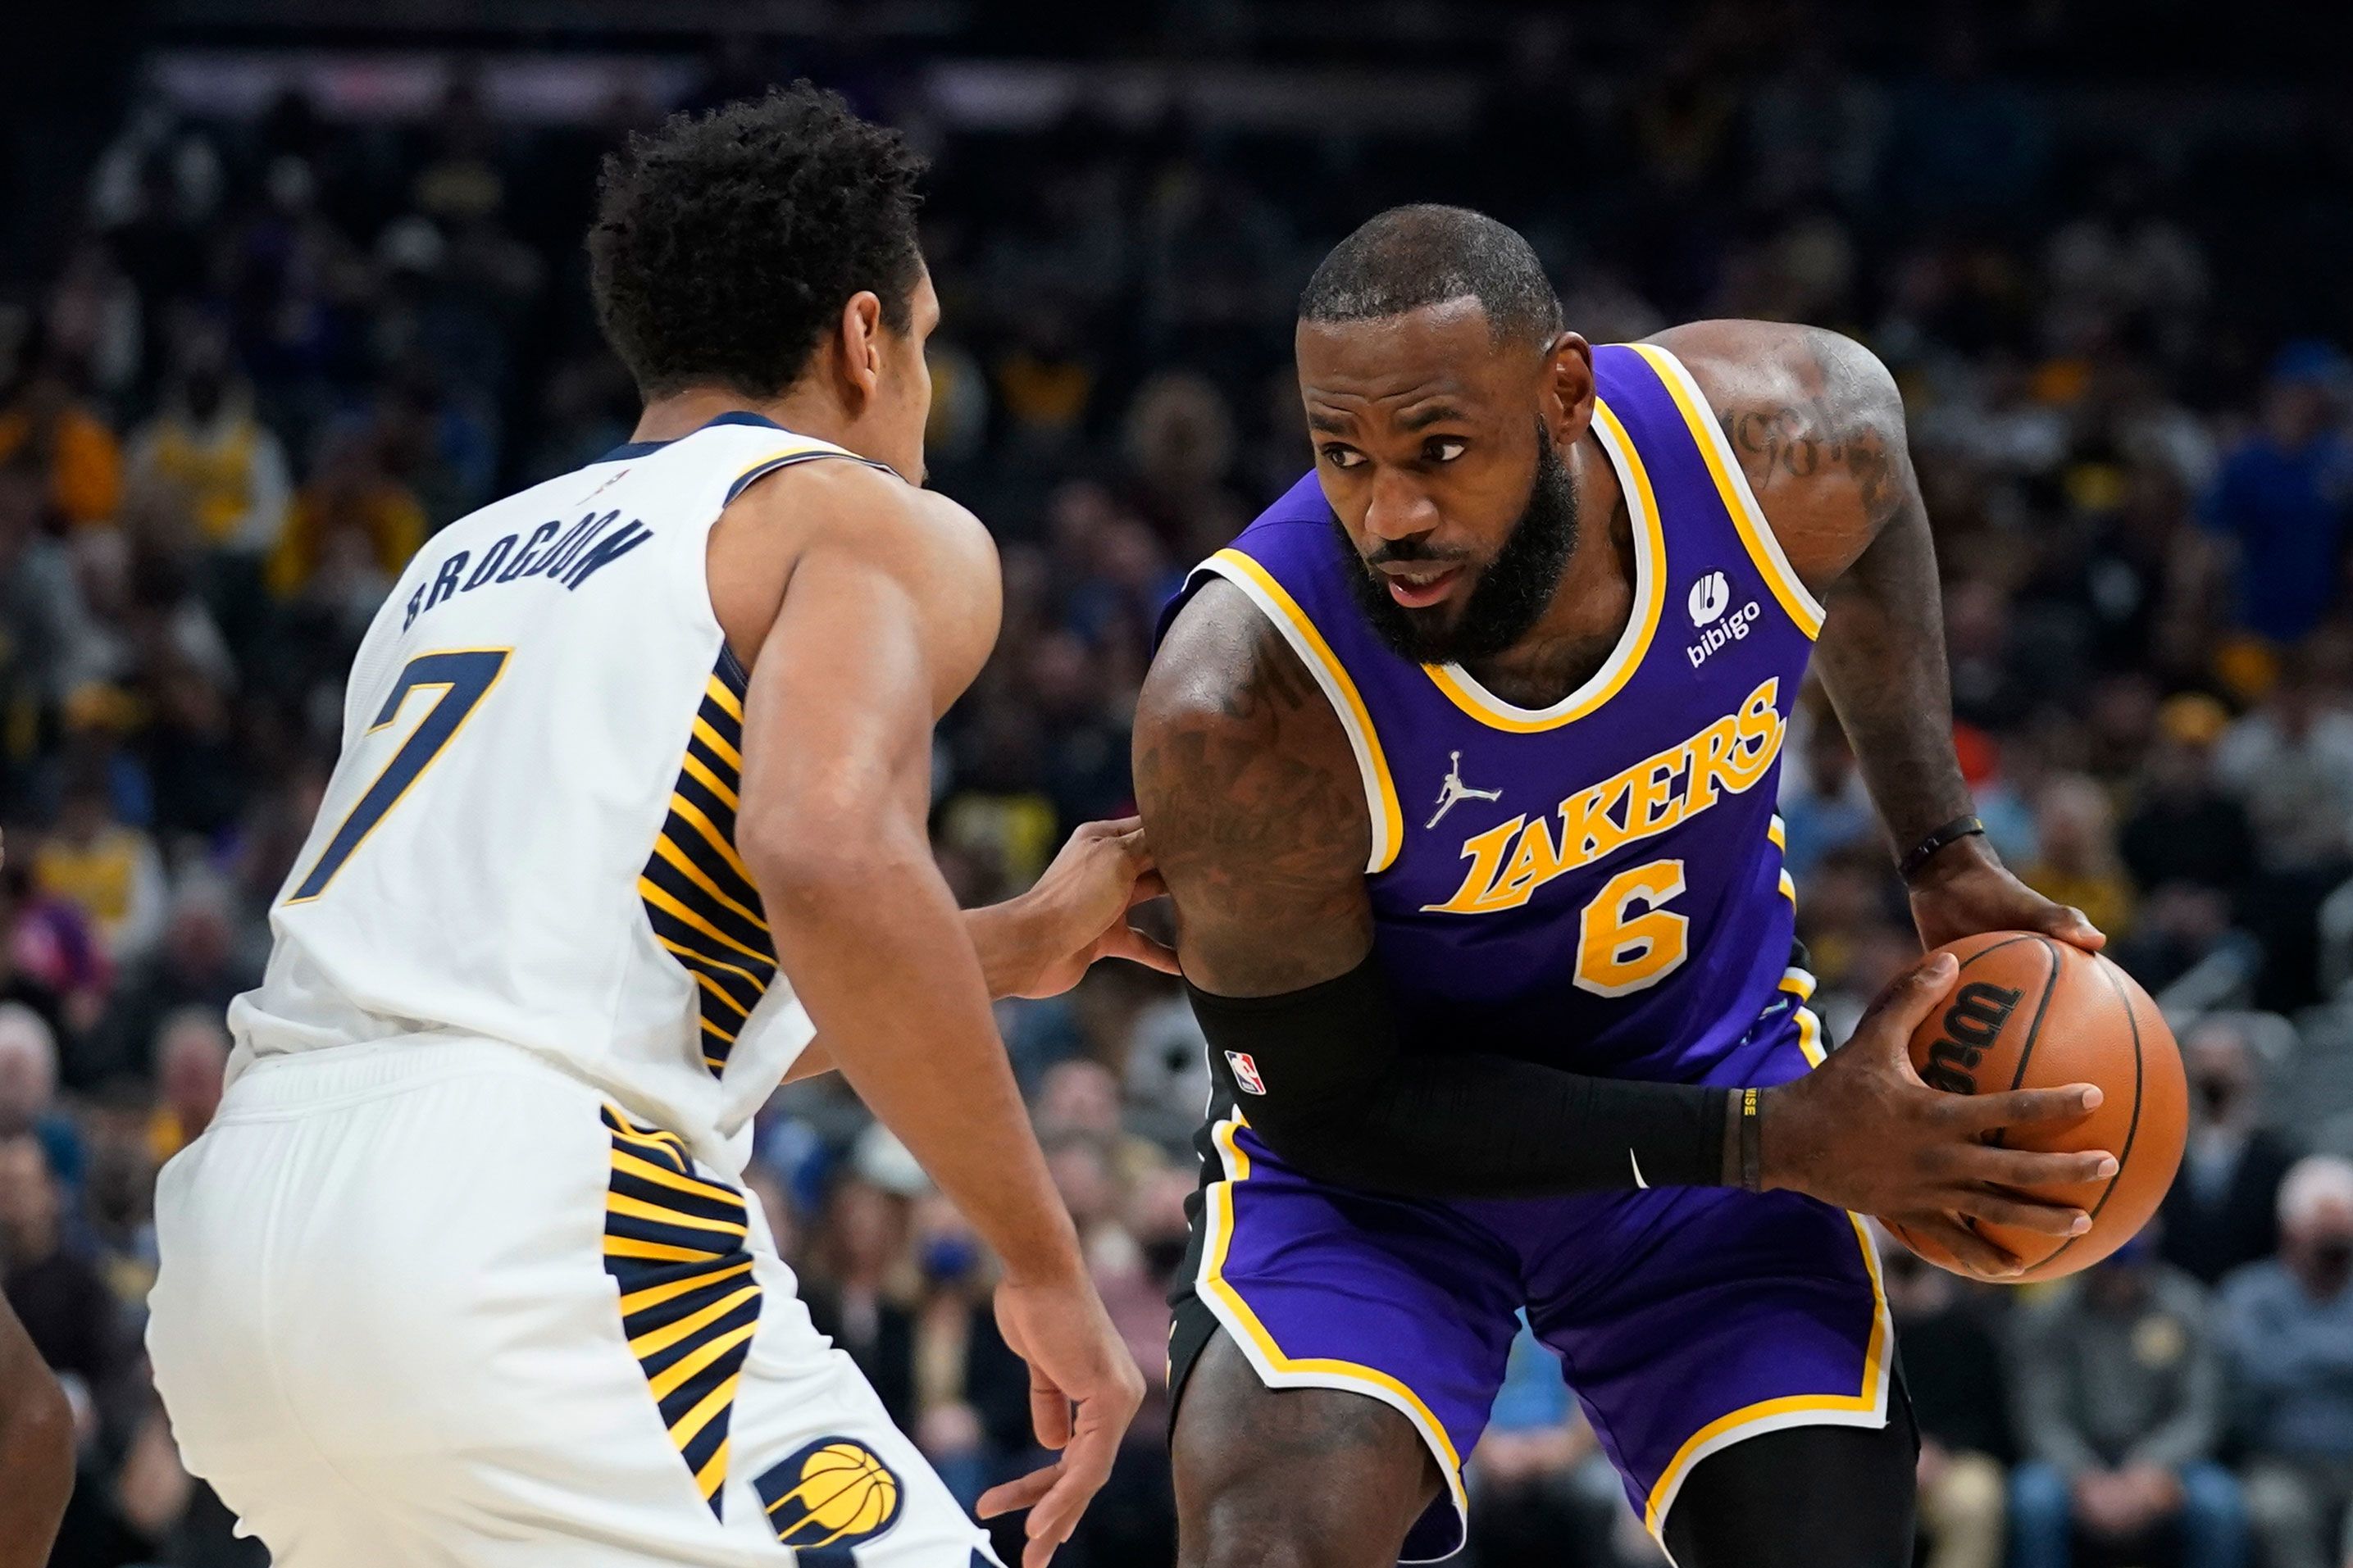 Lakers Overcome James' Absence to Beat Kings 117-92 - Bloomberg